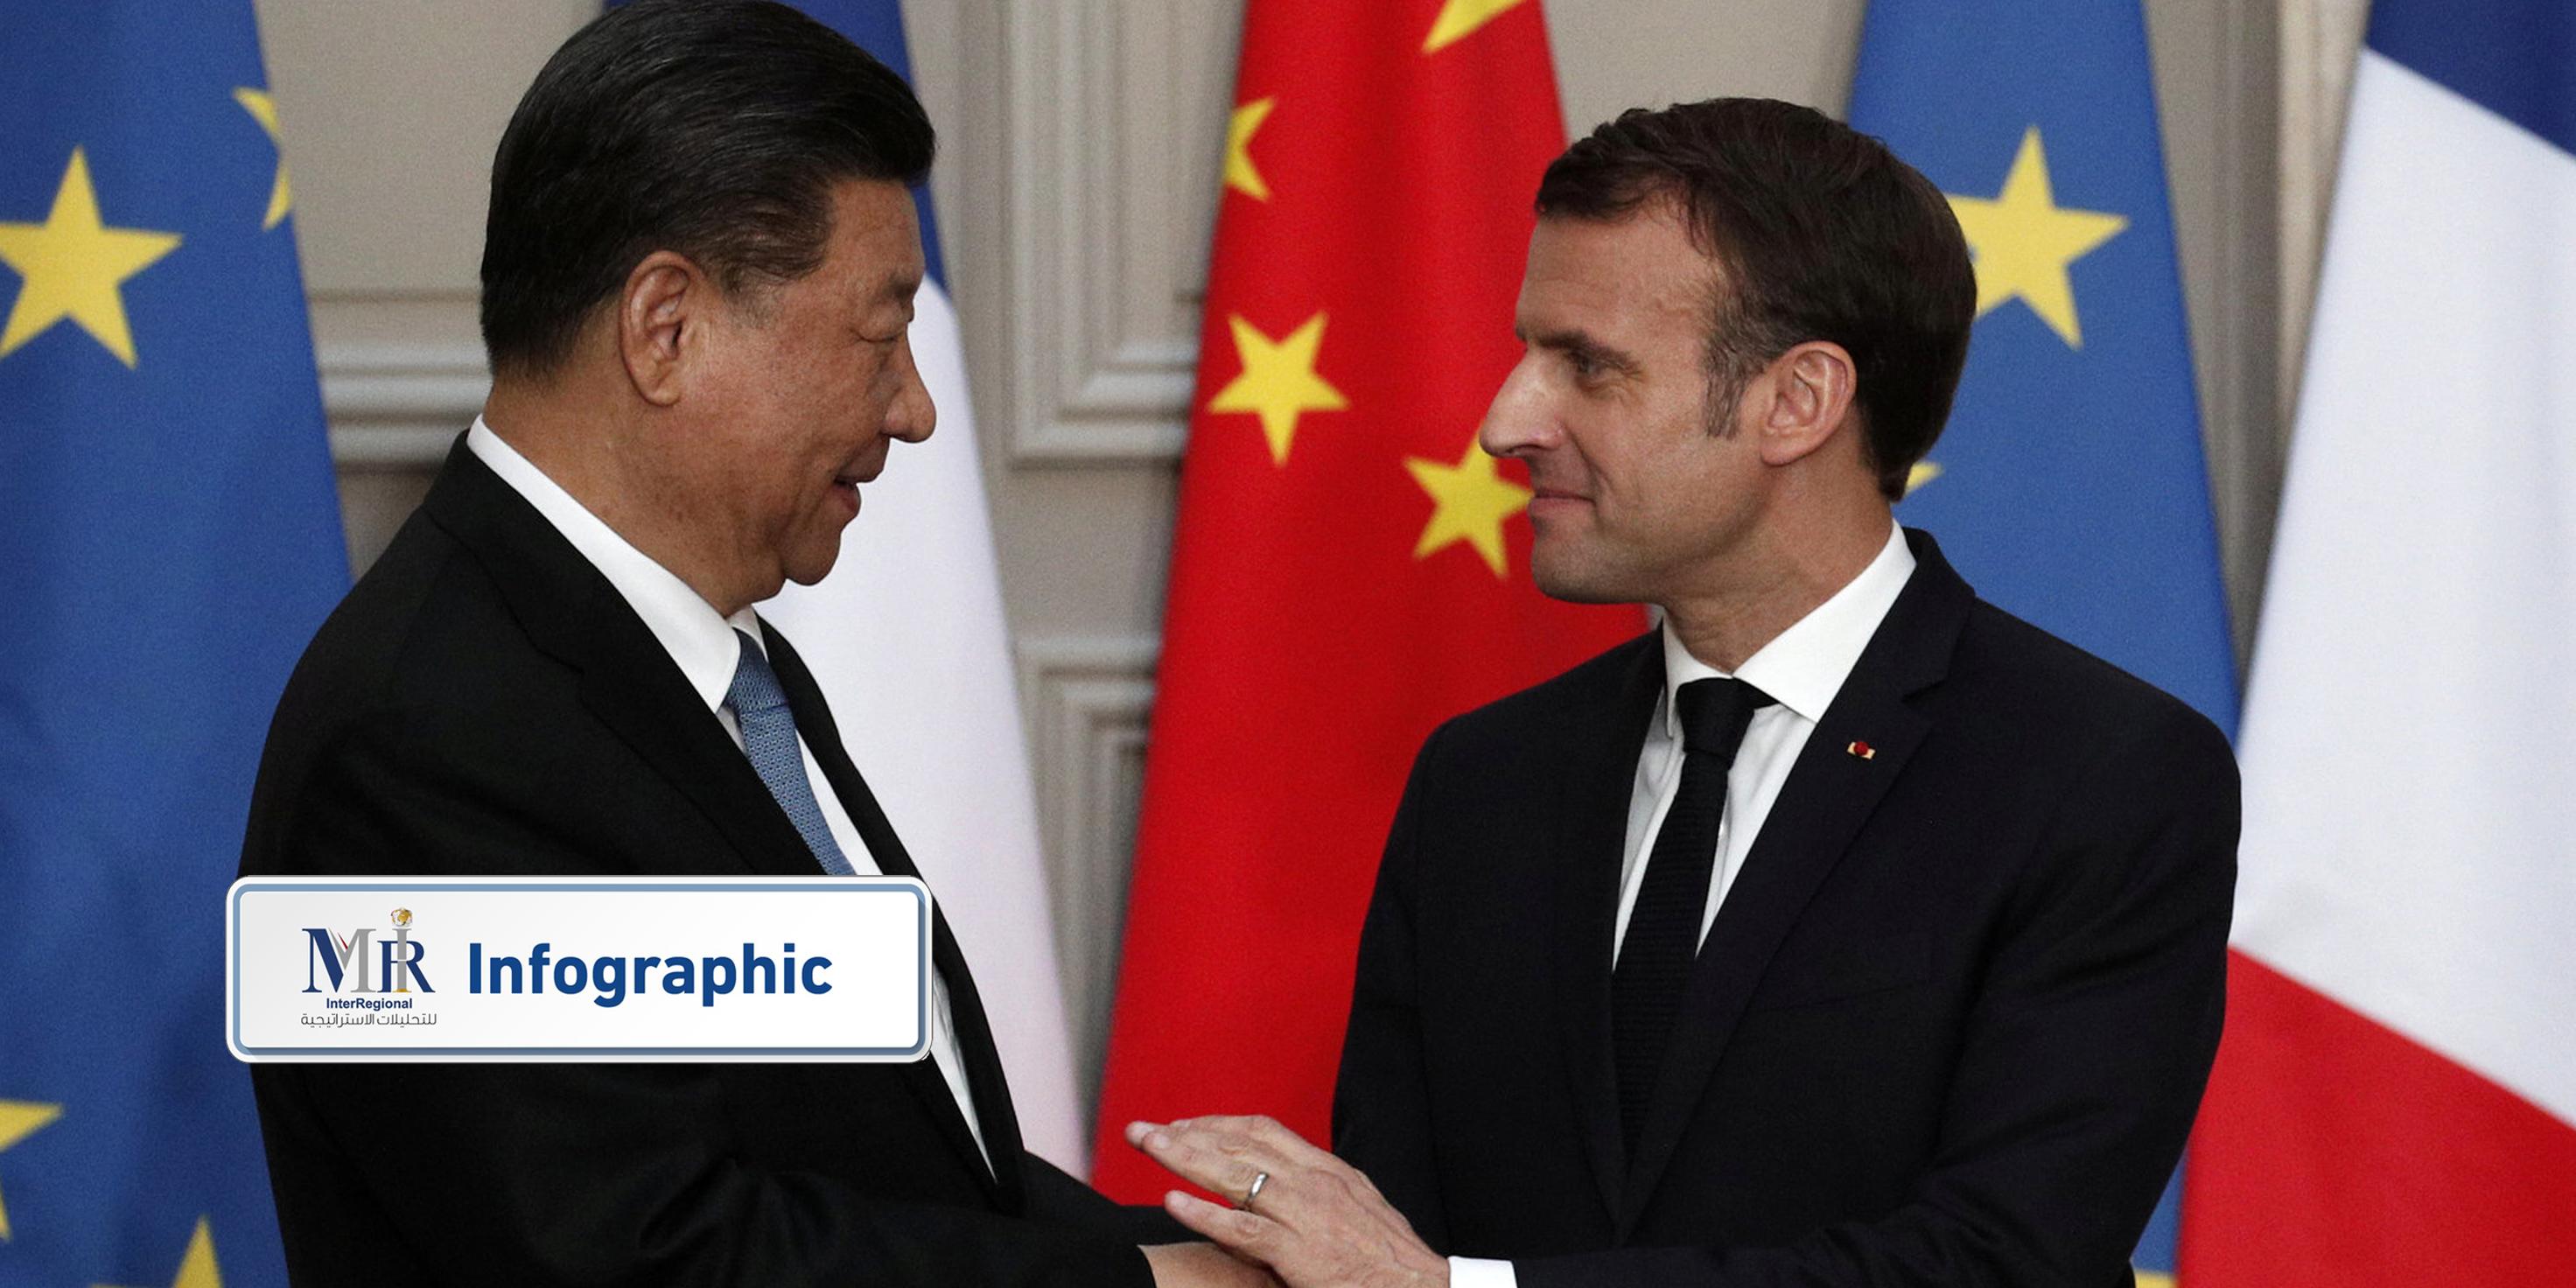 French Support for Macron’s Approach to Developing Ties with China (Infographic)